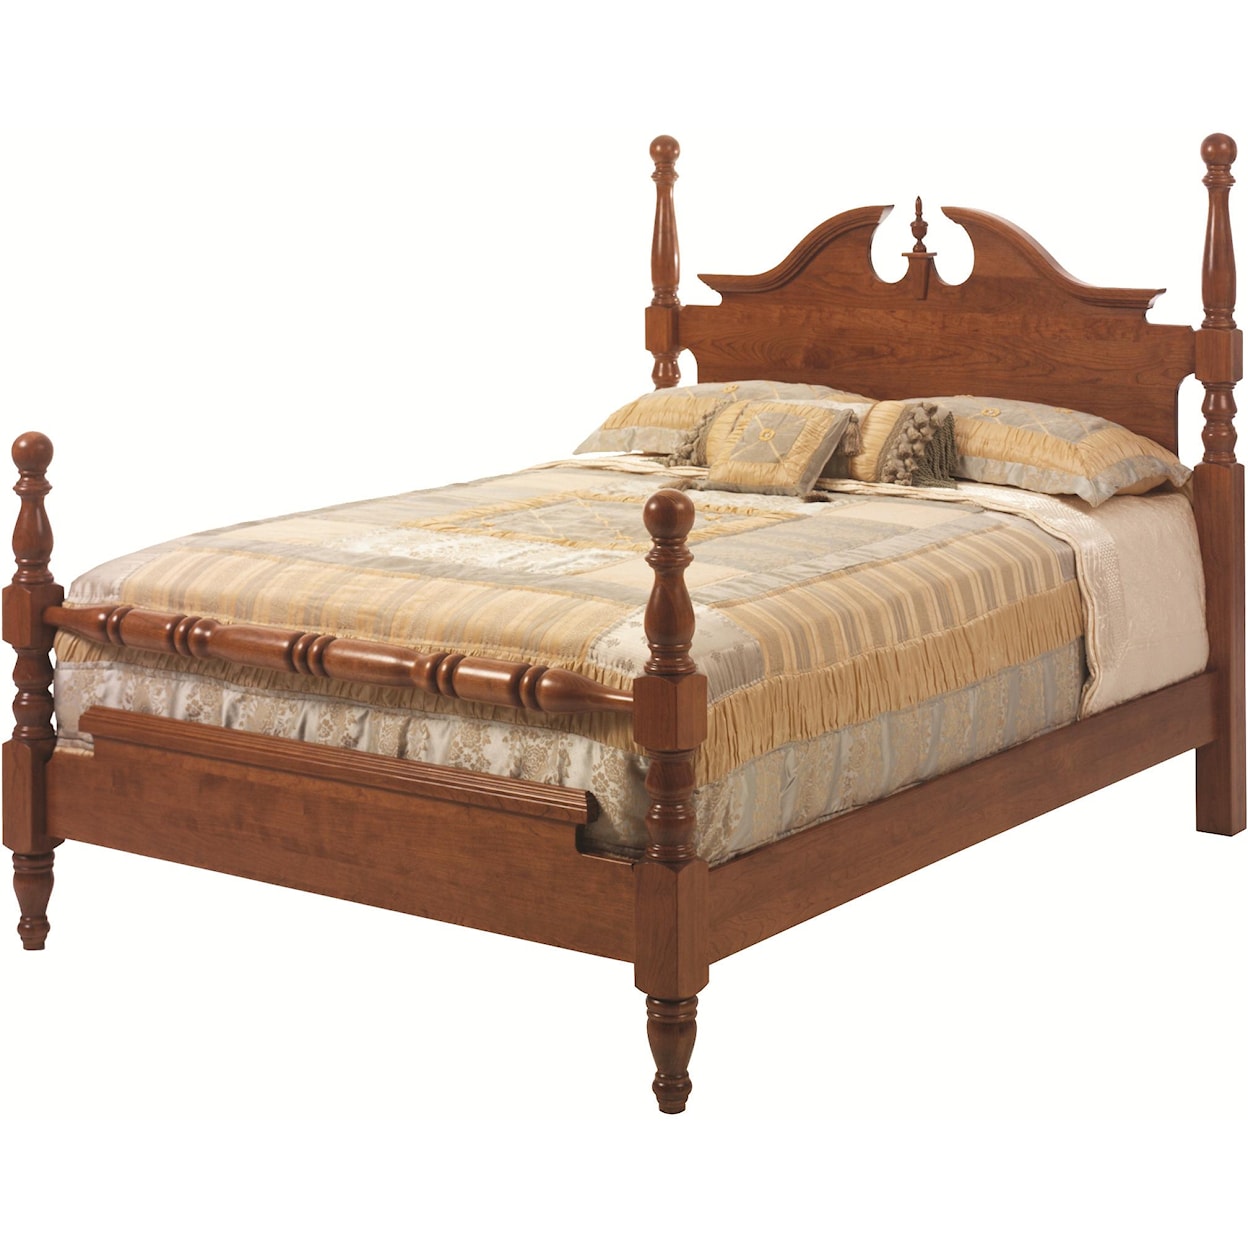 Millcraft Victoria's Tradition Full Cannon Ball Bed